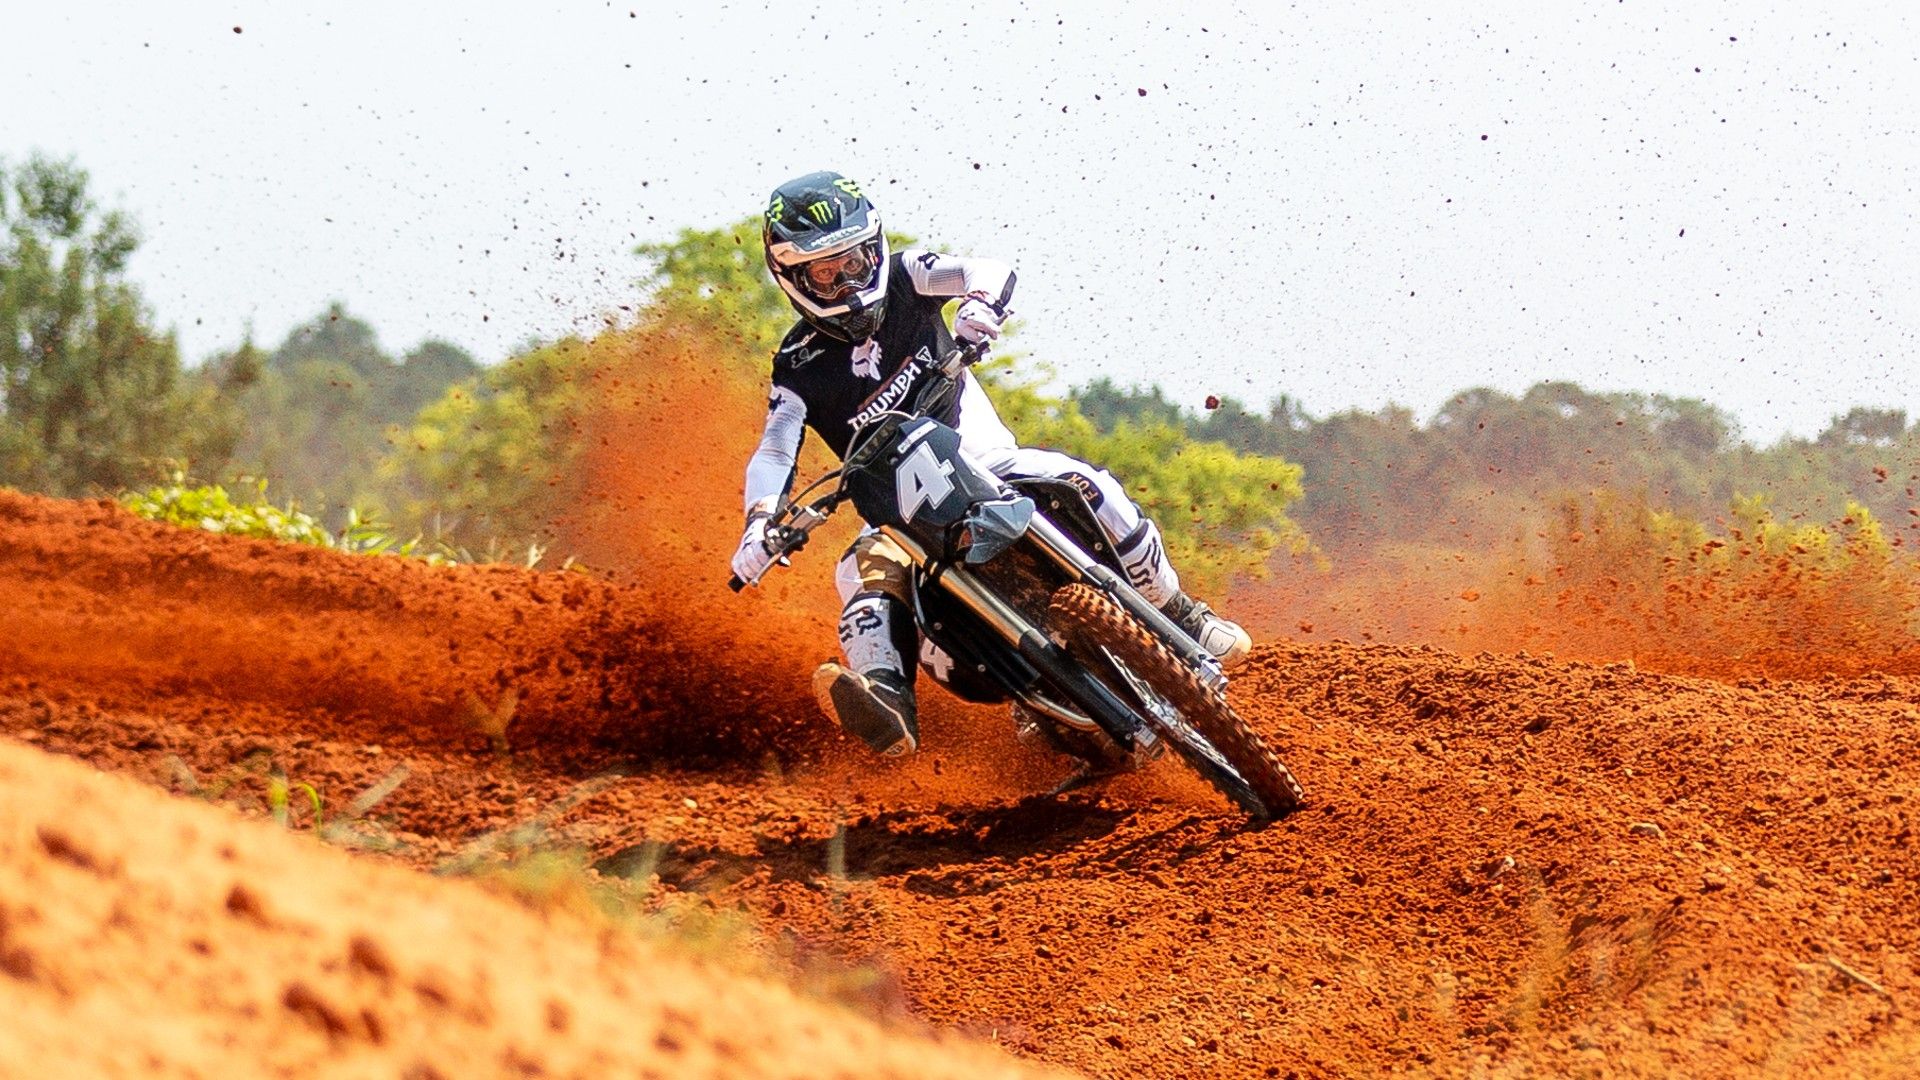 Triumph's New Motocross Bike Shows Its Prowess On The Dirt Track